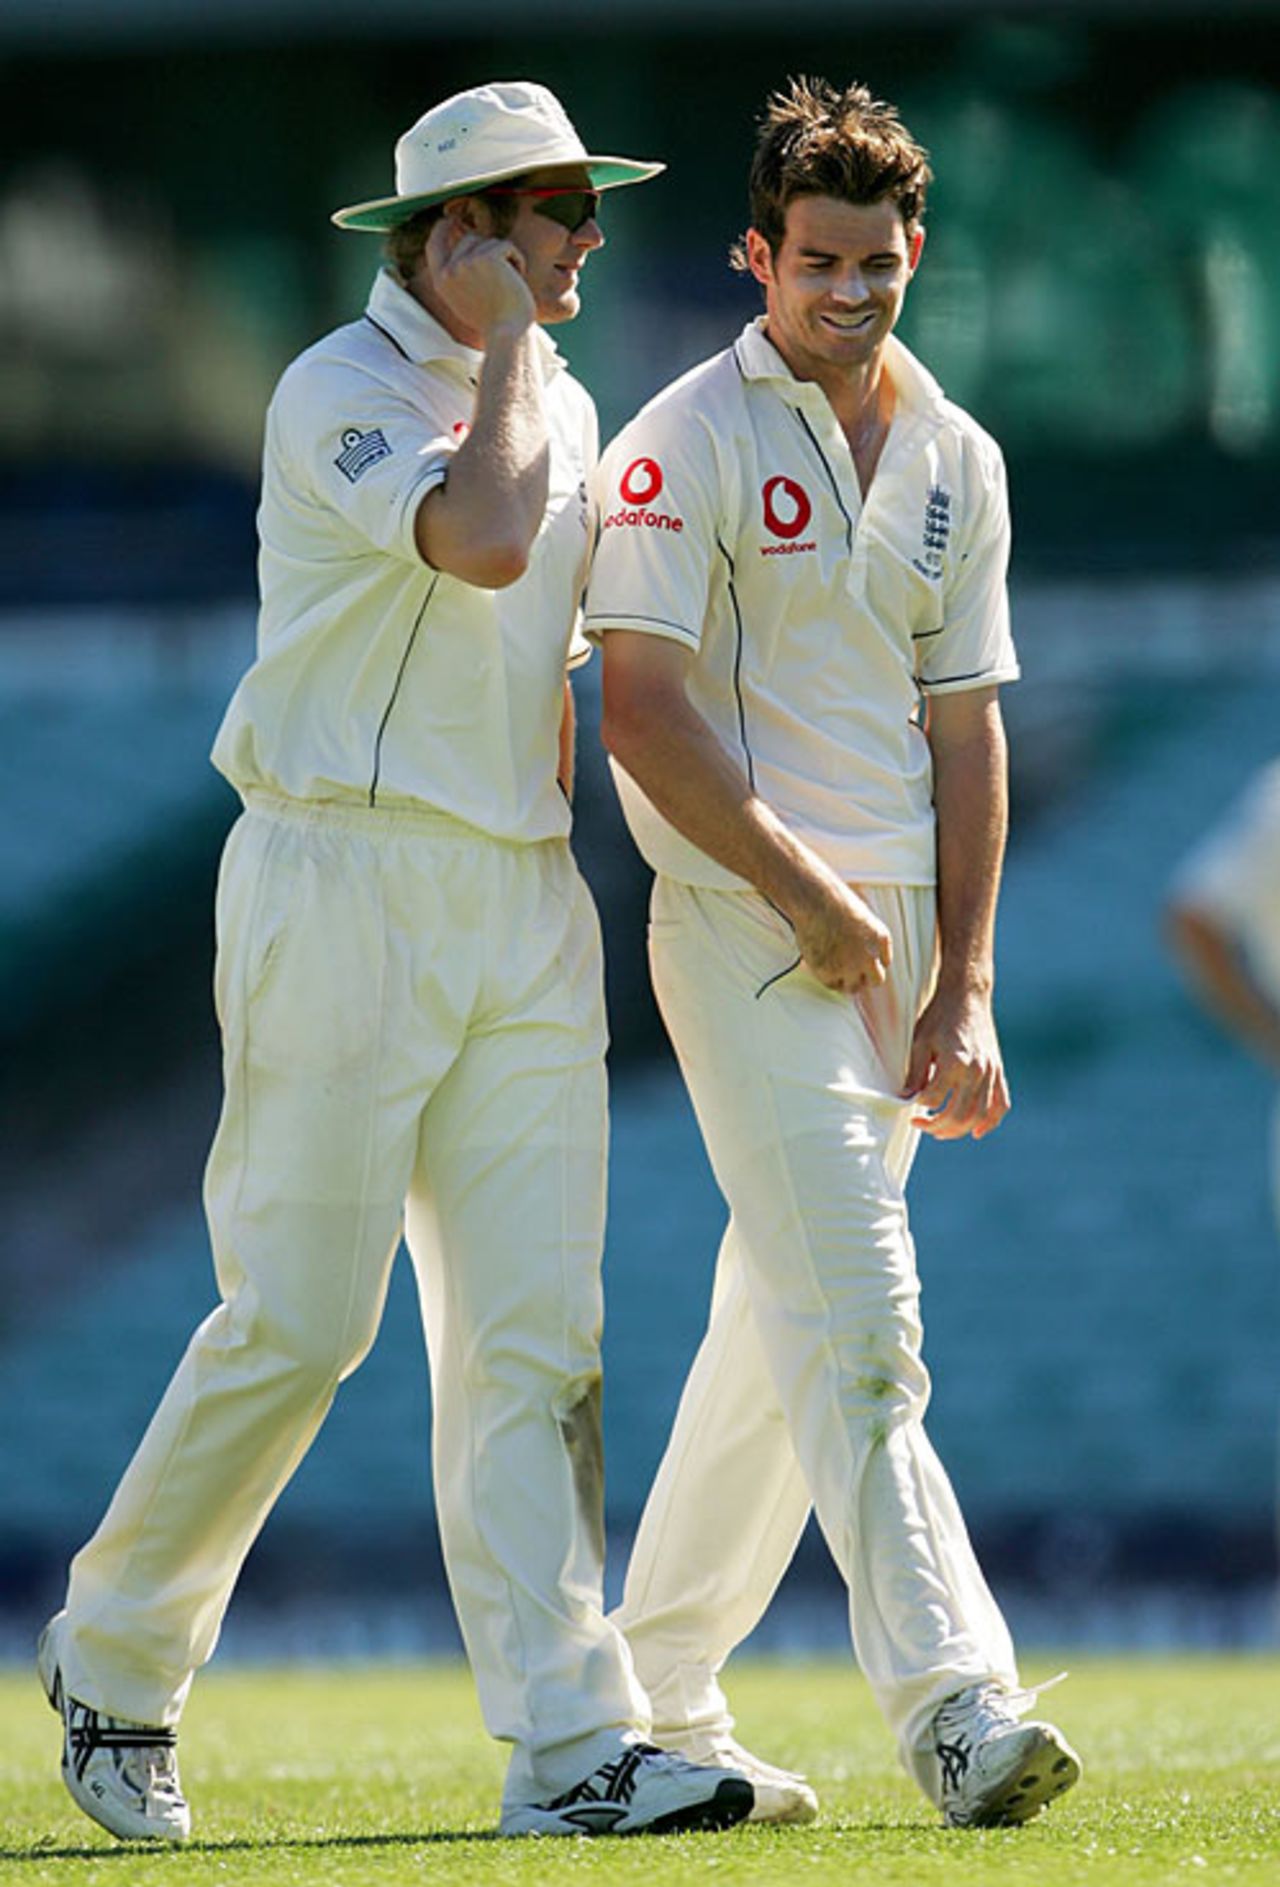 Matthew Hoggard offers James Anderson some advice, New South Wales v England, Sydney, November 14, 2006